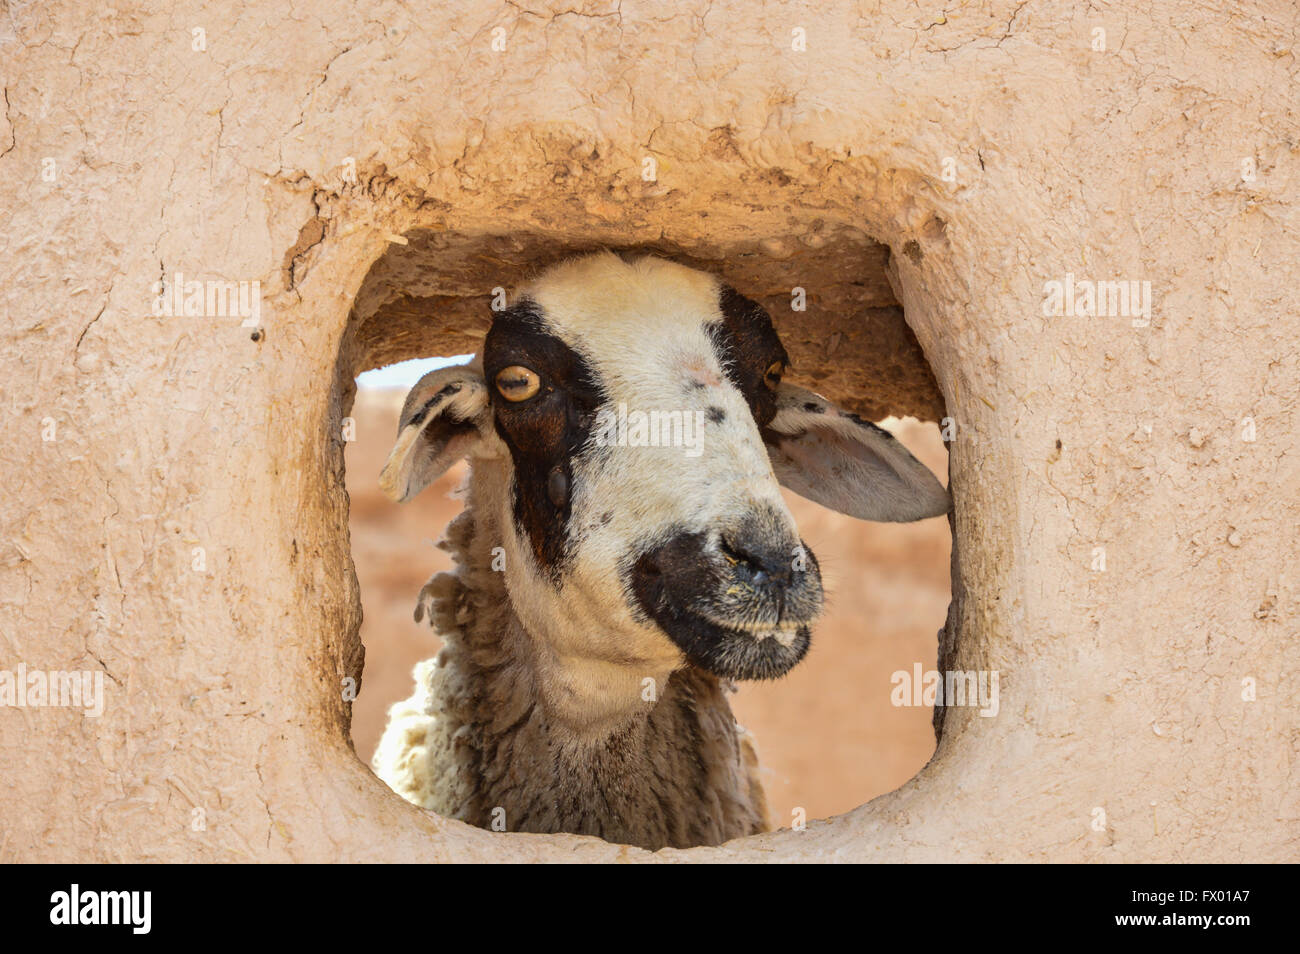 a goat looking at camera through a mud hut window hole, Morocco Stock Photo